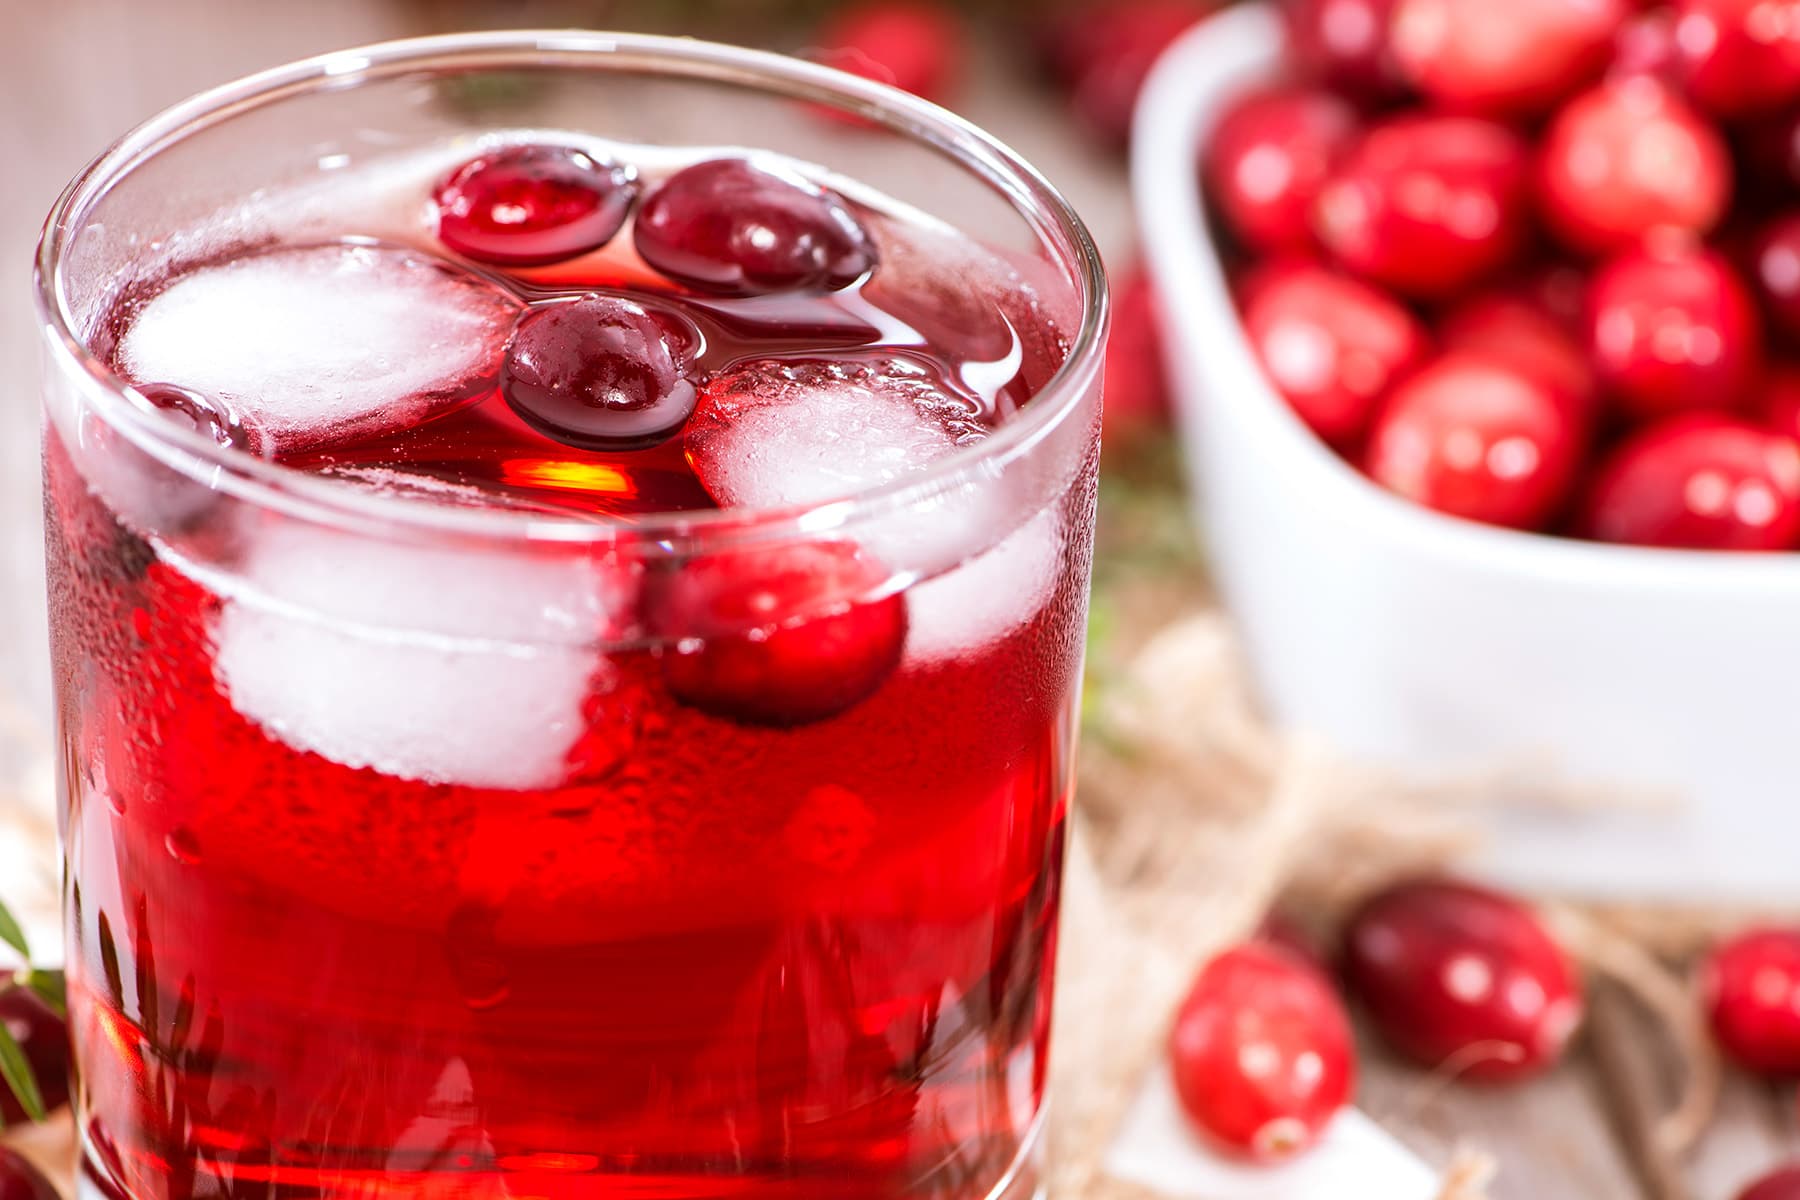 Is Cranberry Juice Good For Pregnancy?